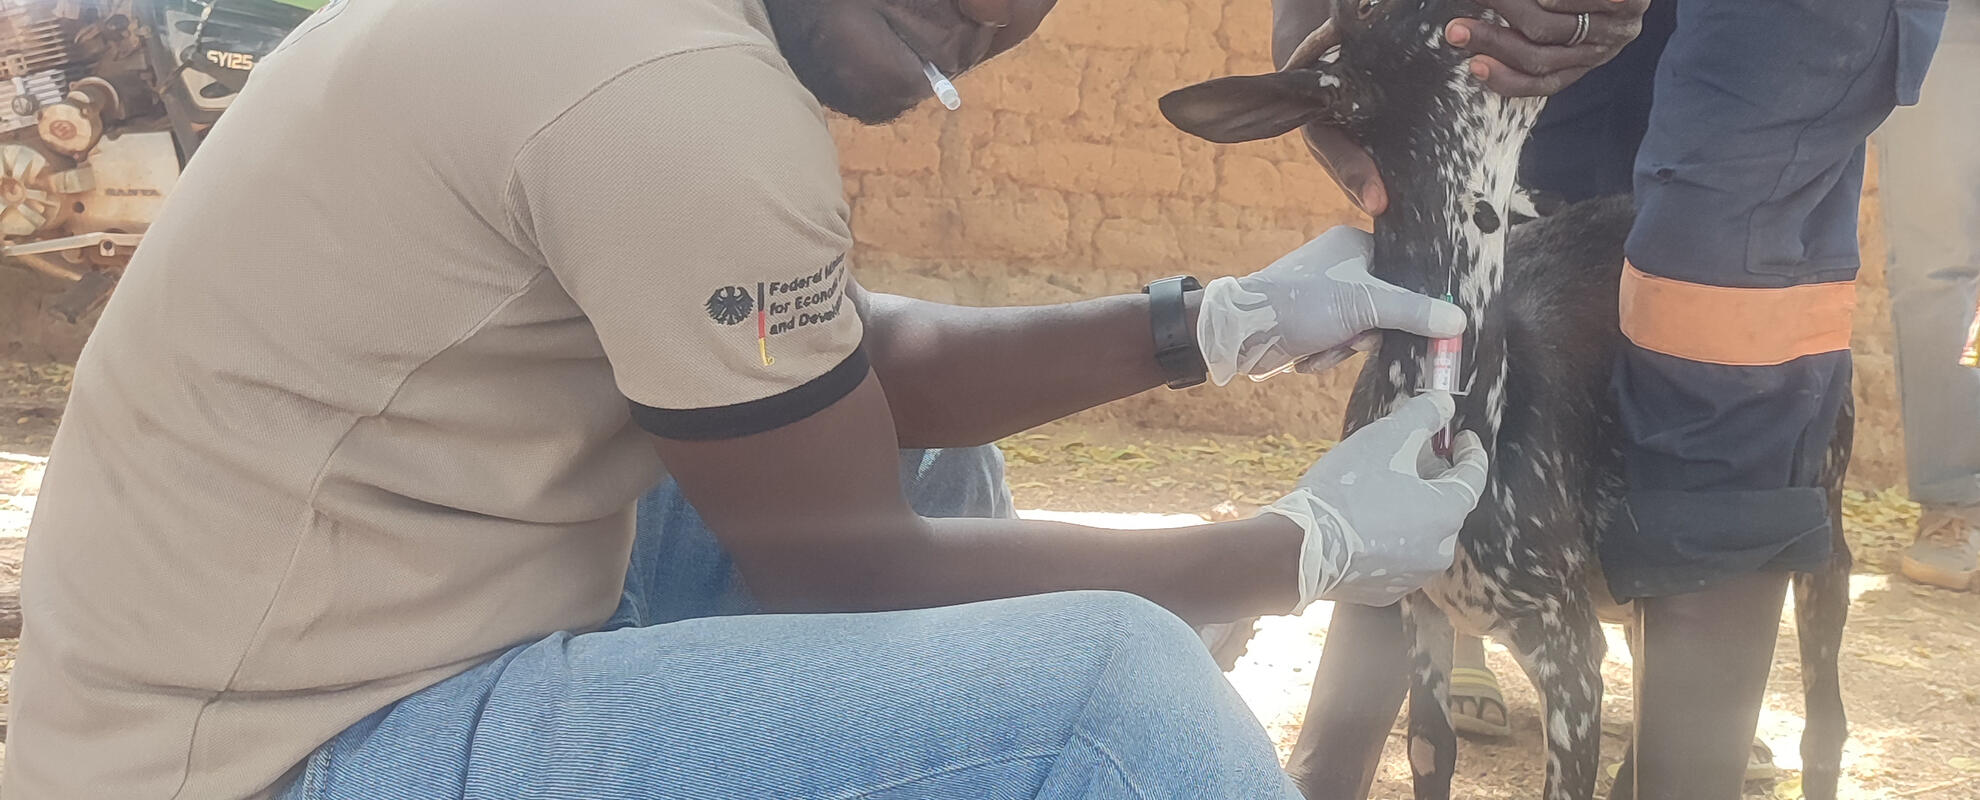 Abdoul Iboudo of ILRI takes a blood sample from a goat in Burkina Faso (photo credit: Moctar Yougbaré).